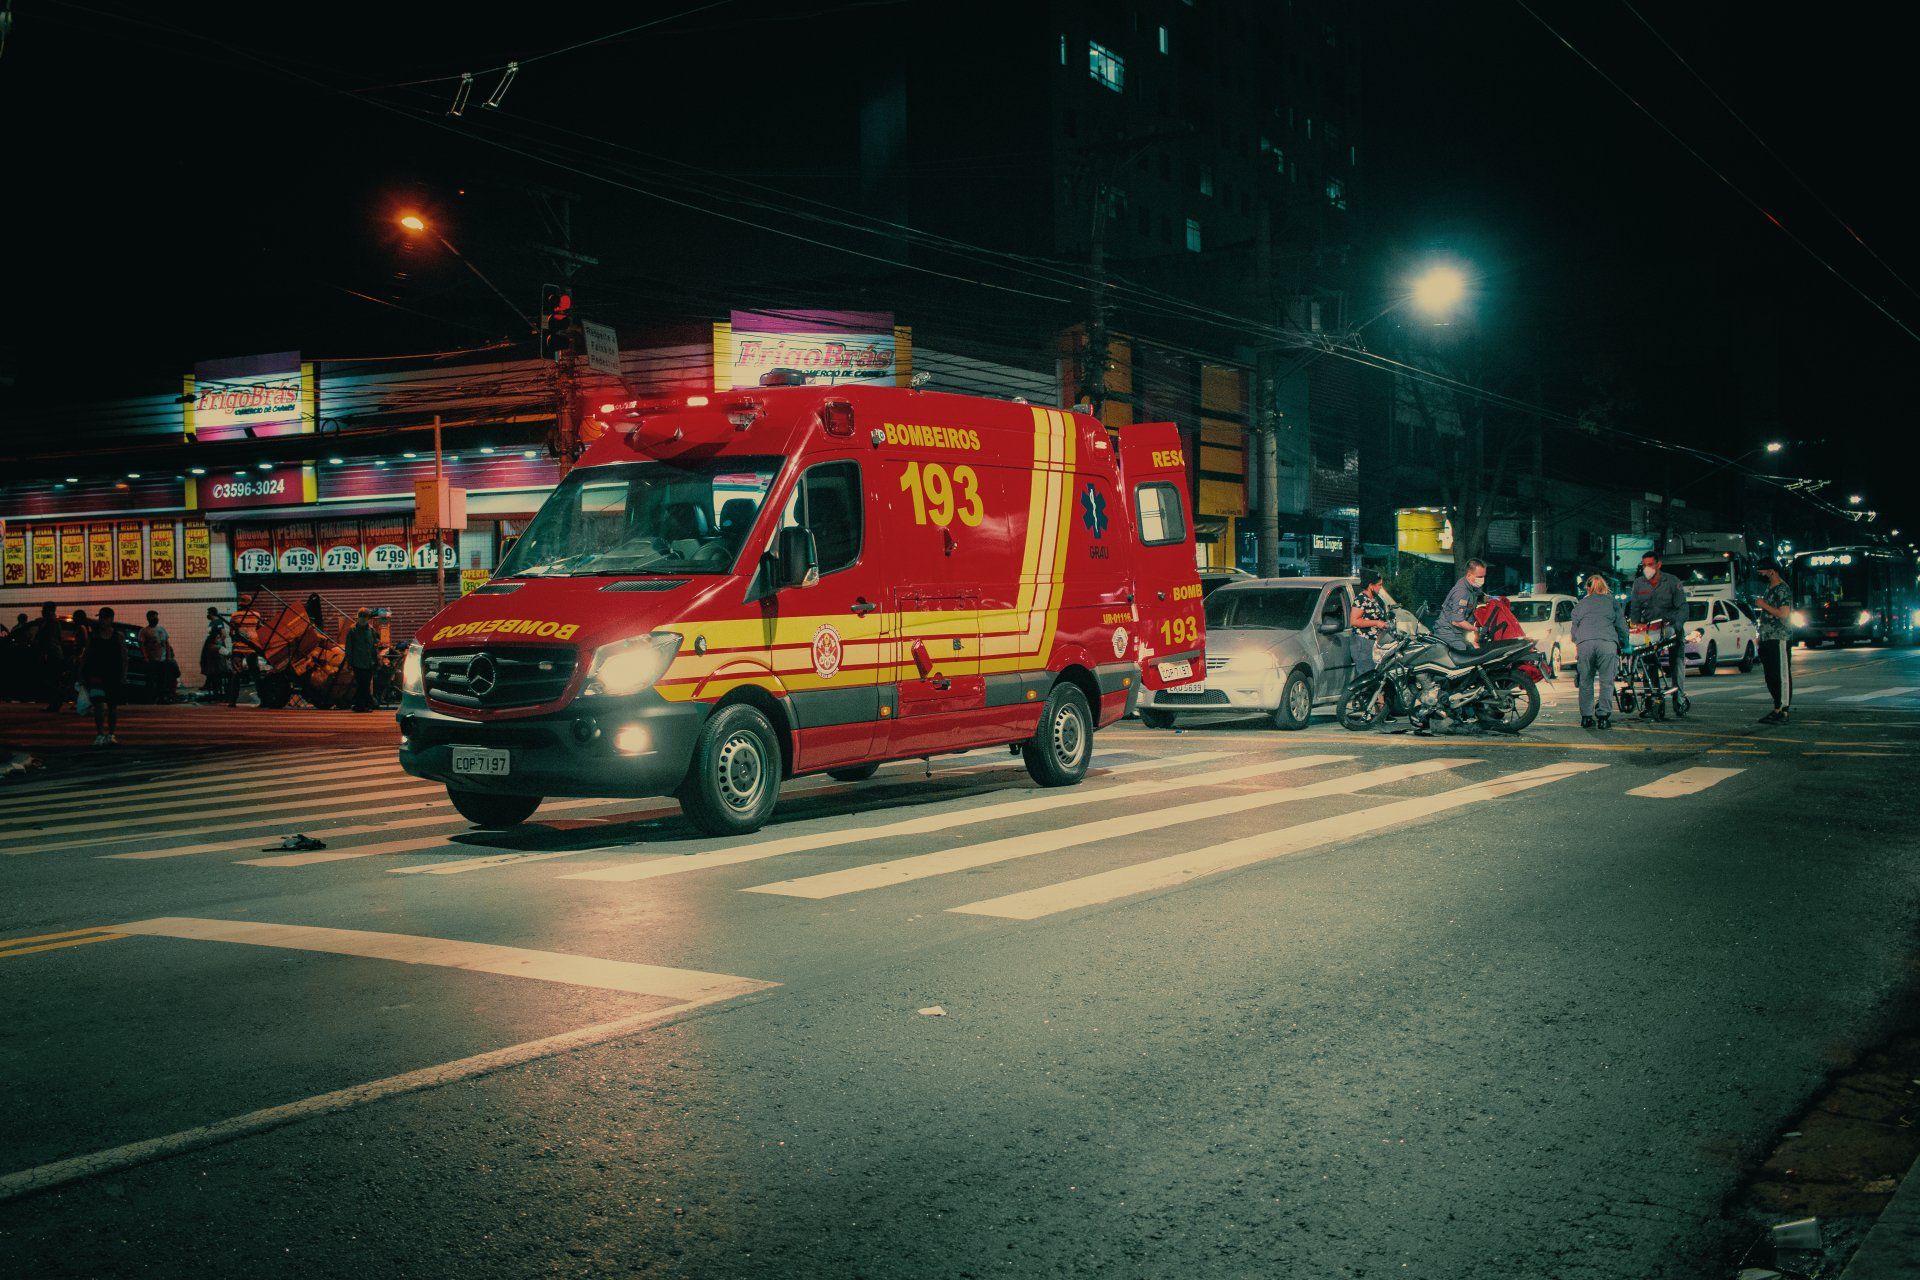 An ambulance is driving down a city street at night.